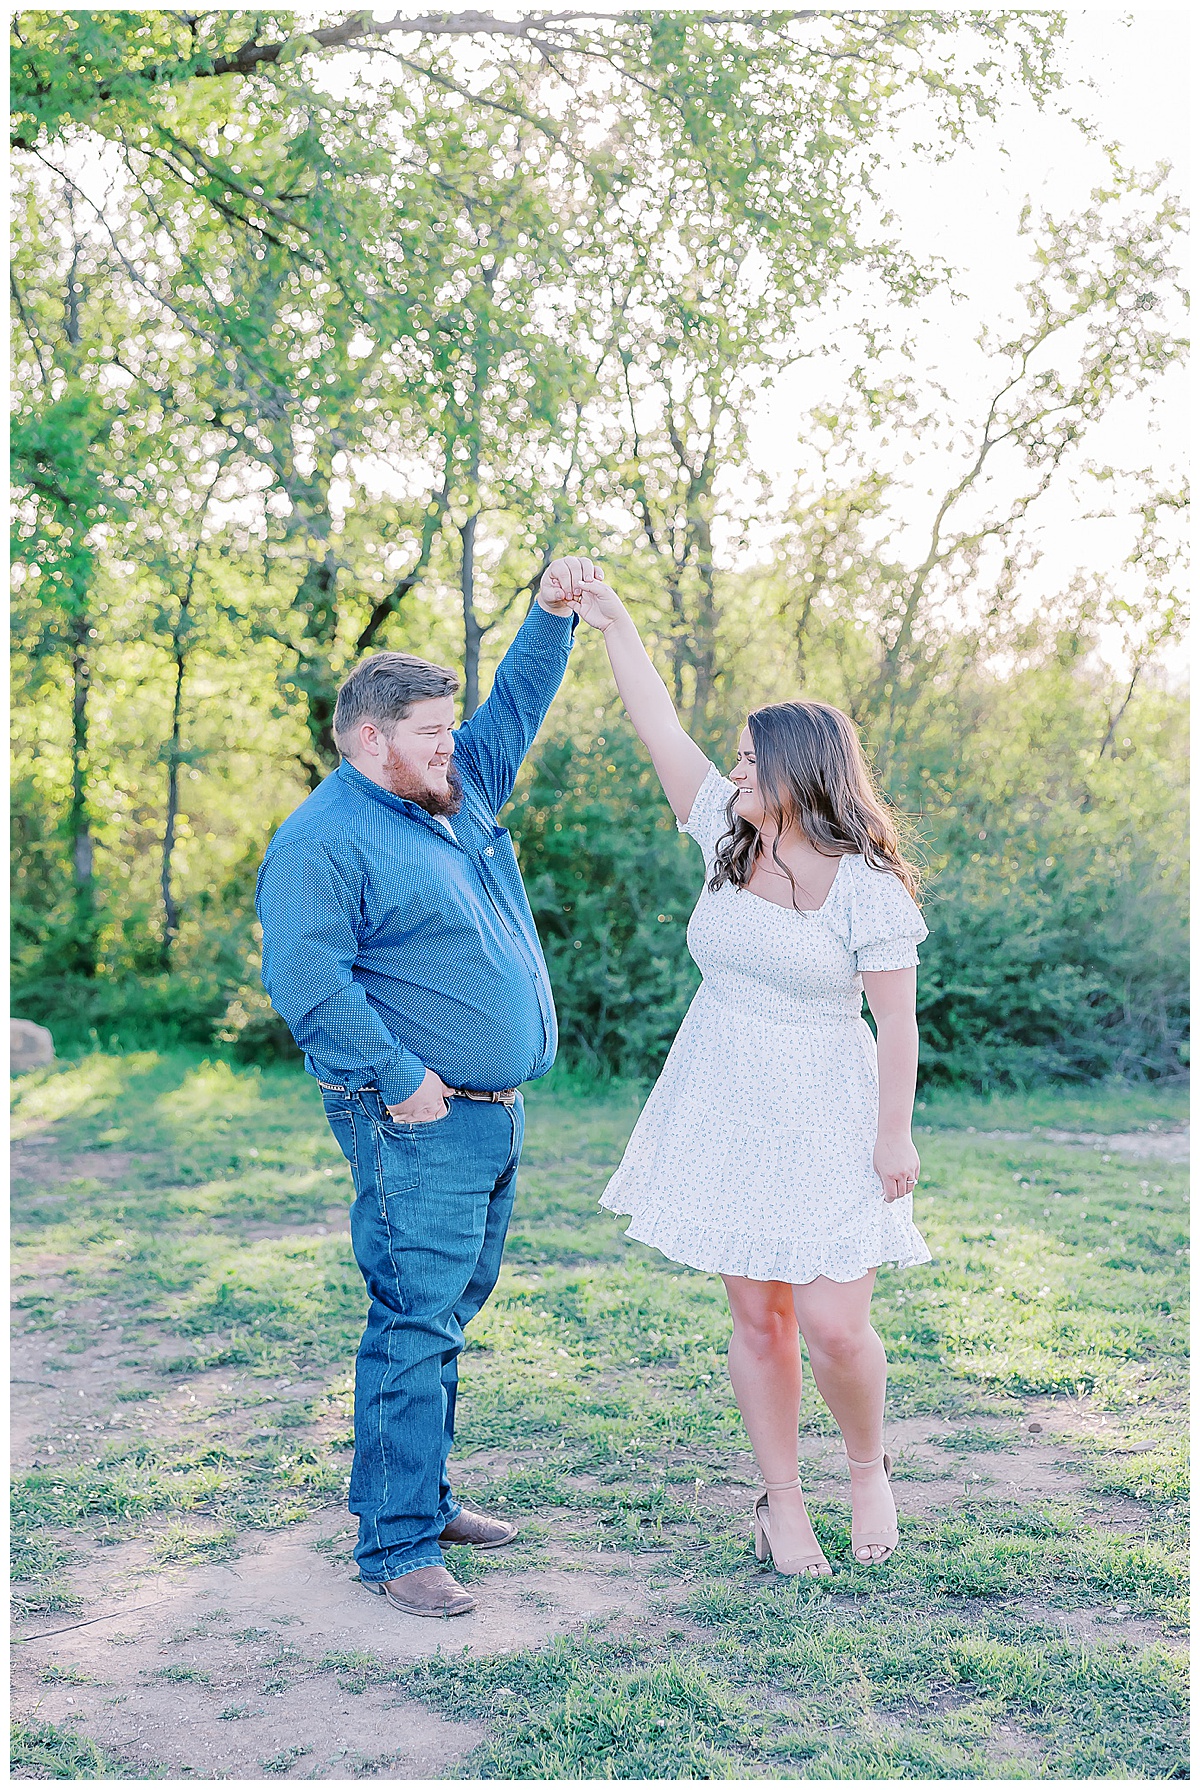 tandy hills engagement session, tandy hills engagement, dallas engagement photographer, dallas engagement session, brides of north texas, diamond h3 ranch